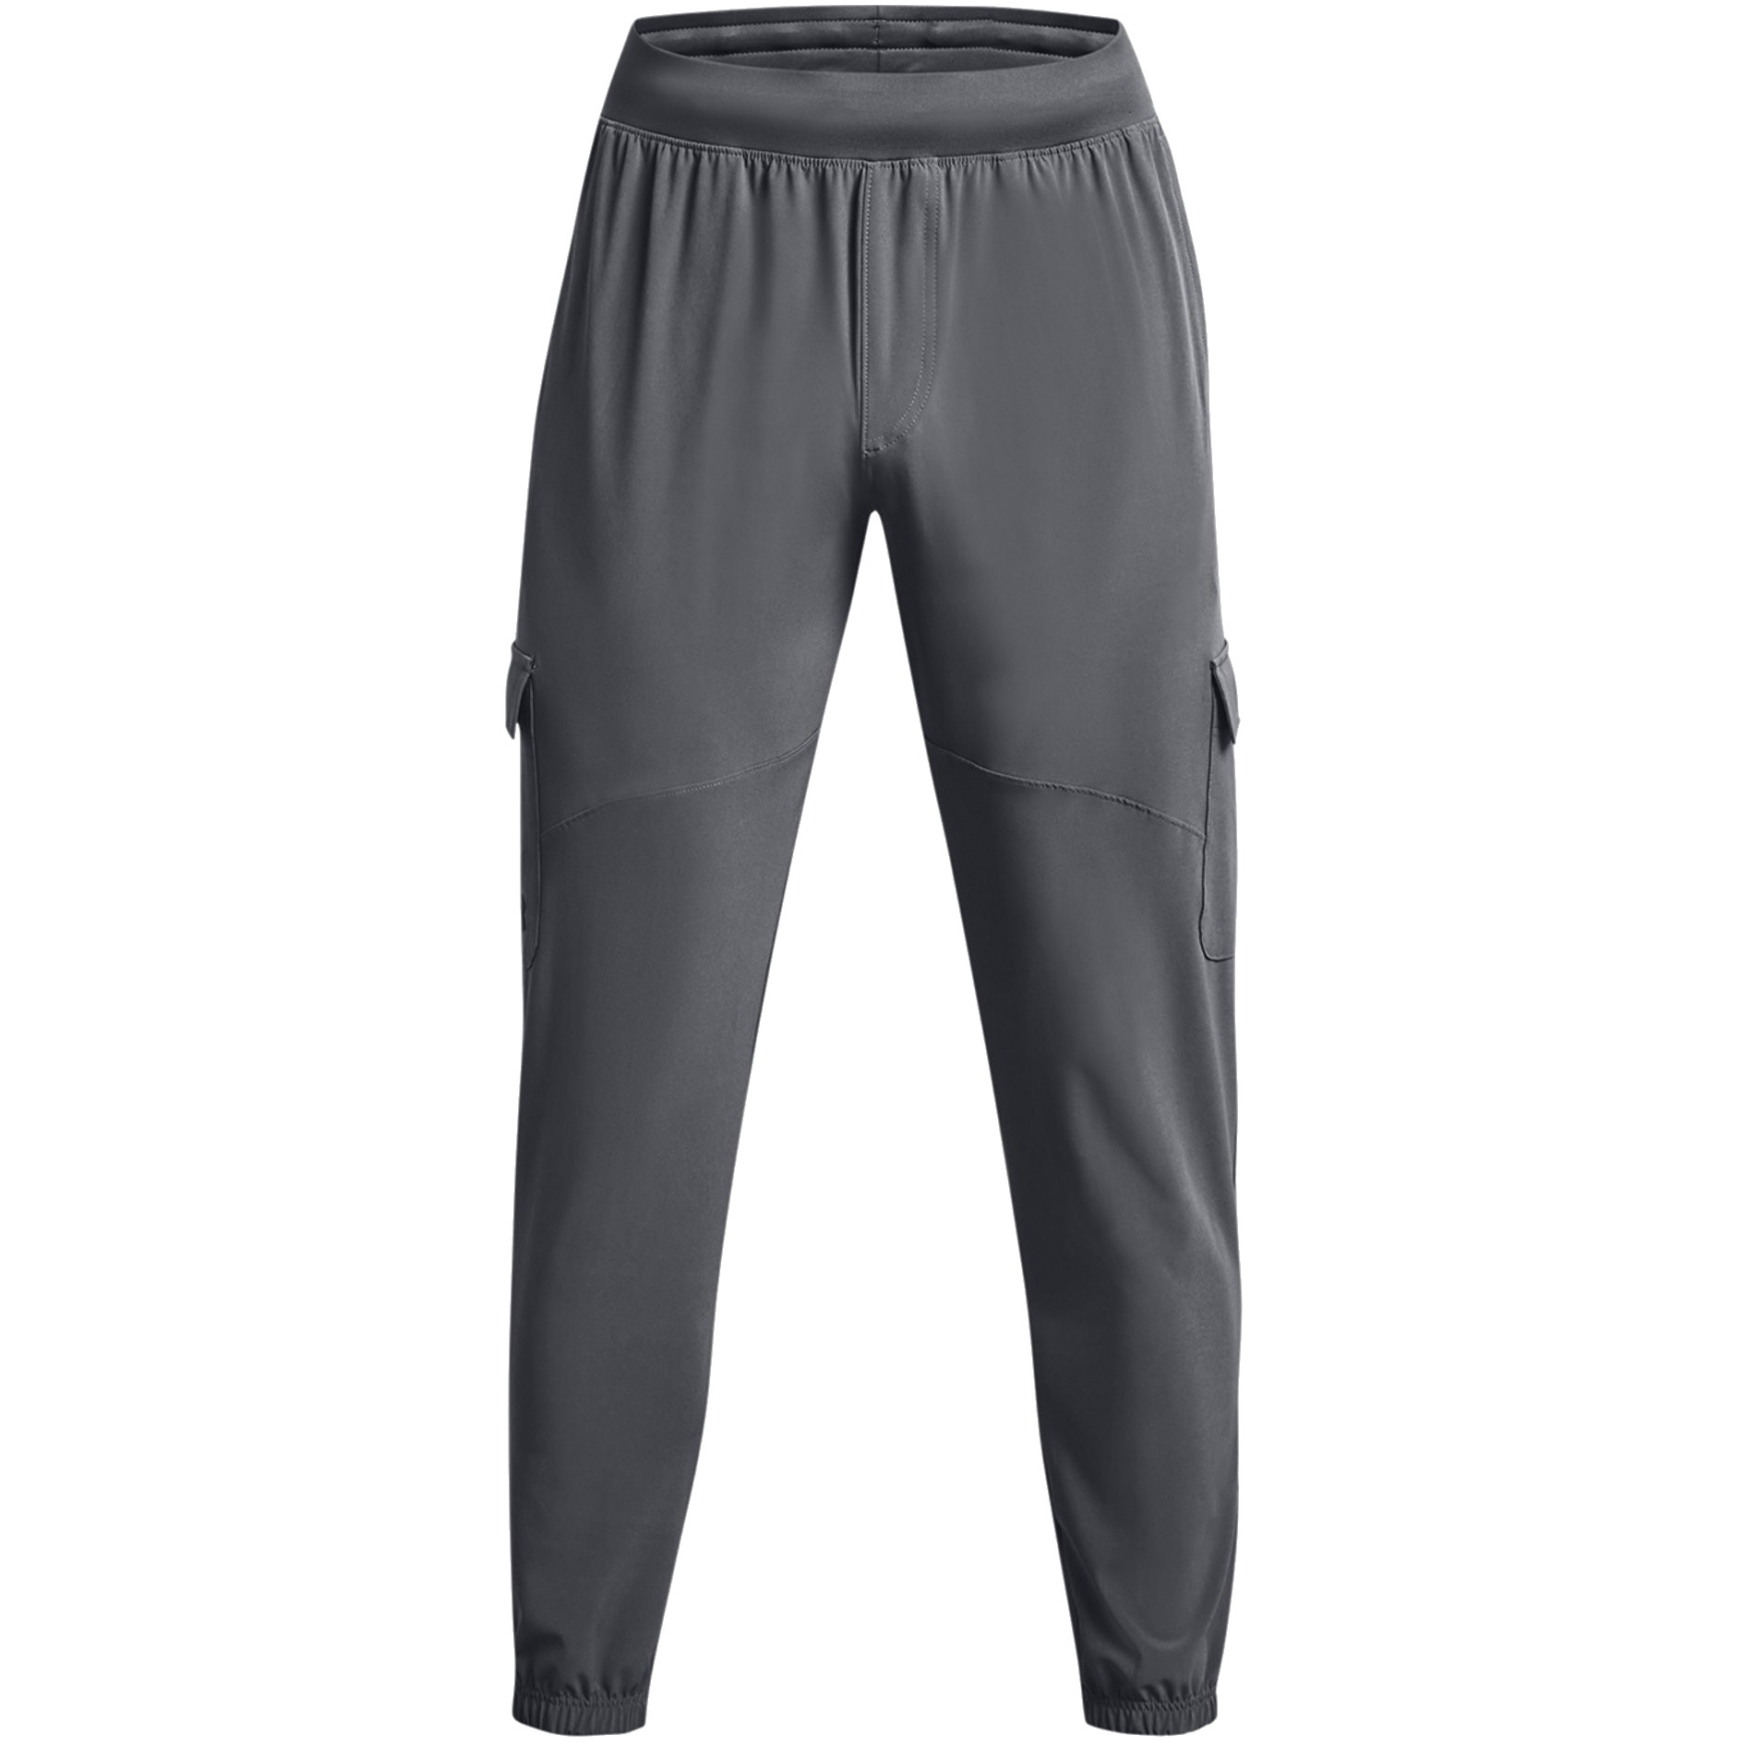 Under Armour Stretch Woven Pants 'Pitch Gray/Black' - 1366215-012